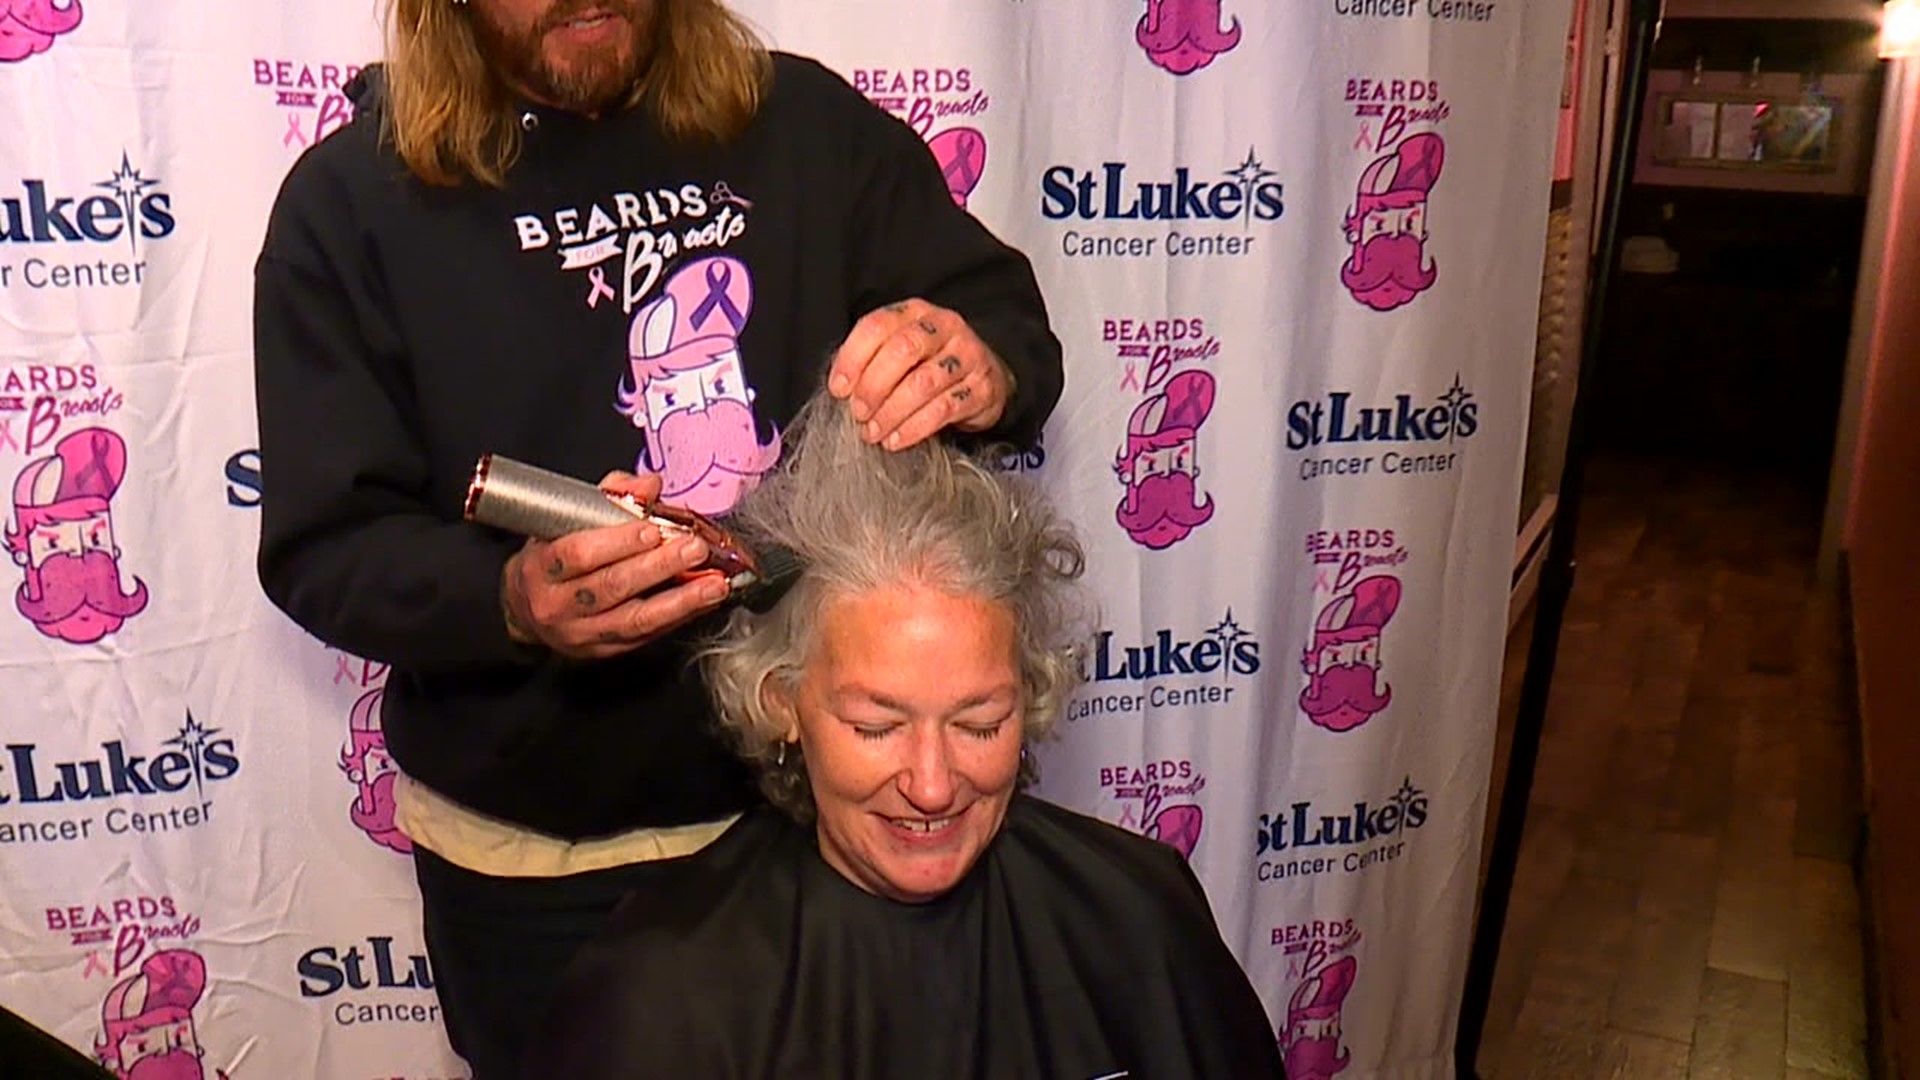 From baking sweet treats to shaving heads, people in Carbon County are doing it all to raise money for cancer.